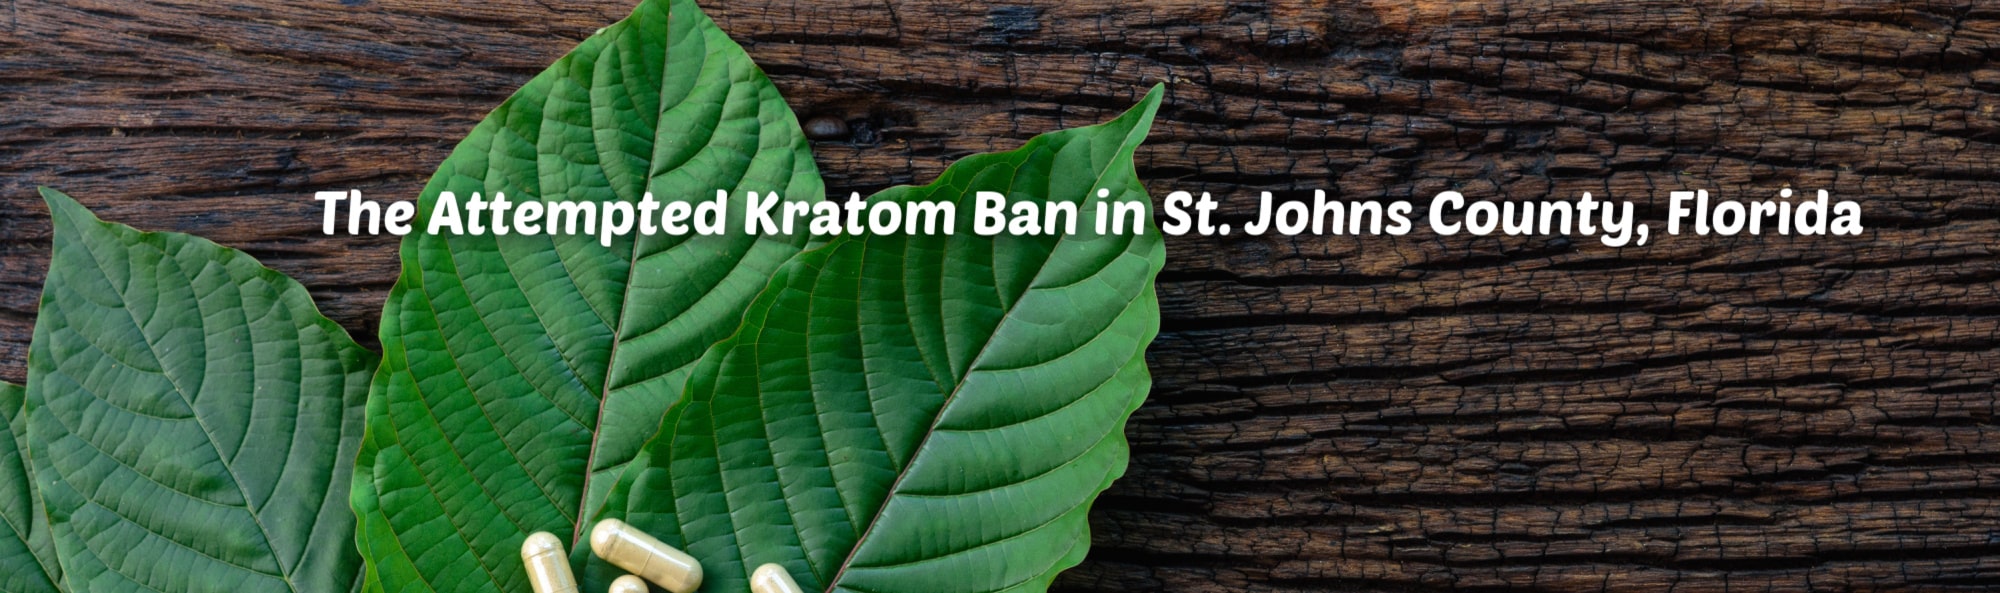 image of the attempted kratom ban in st johns county florida